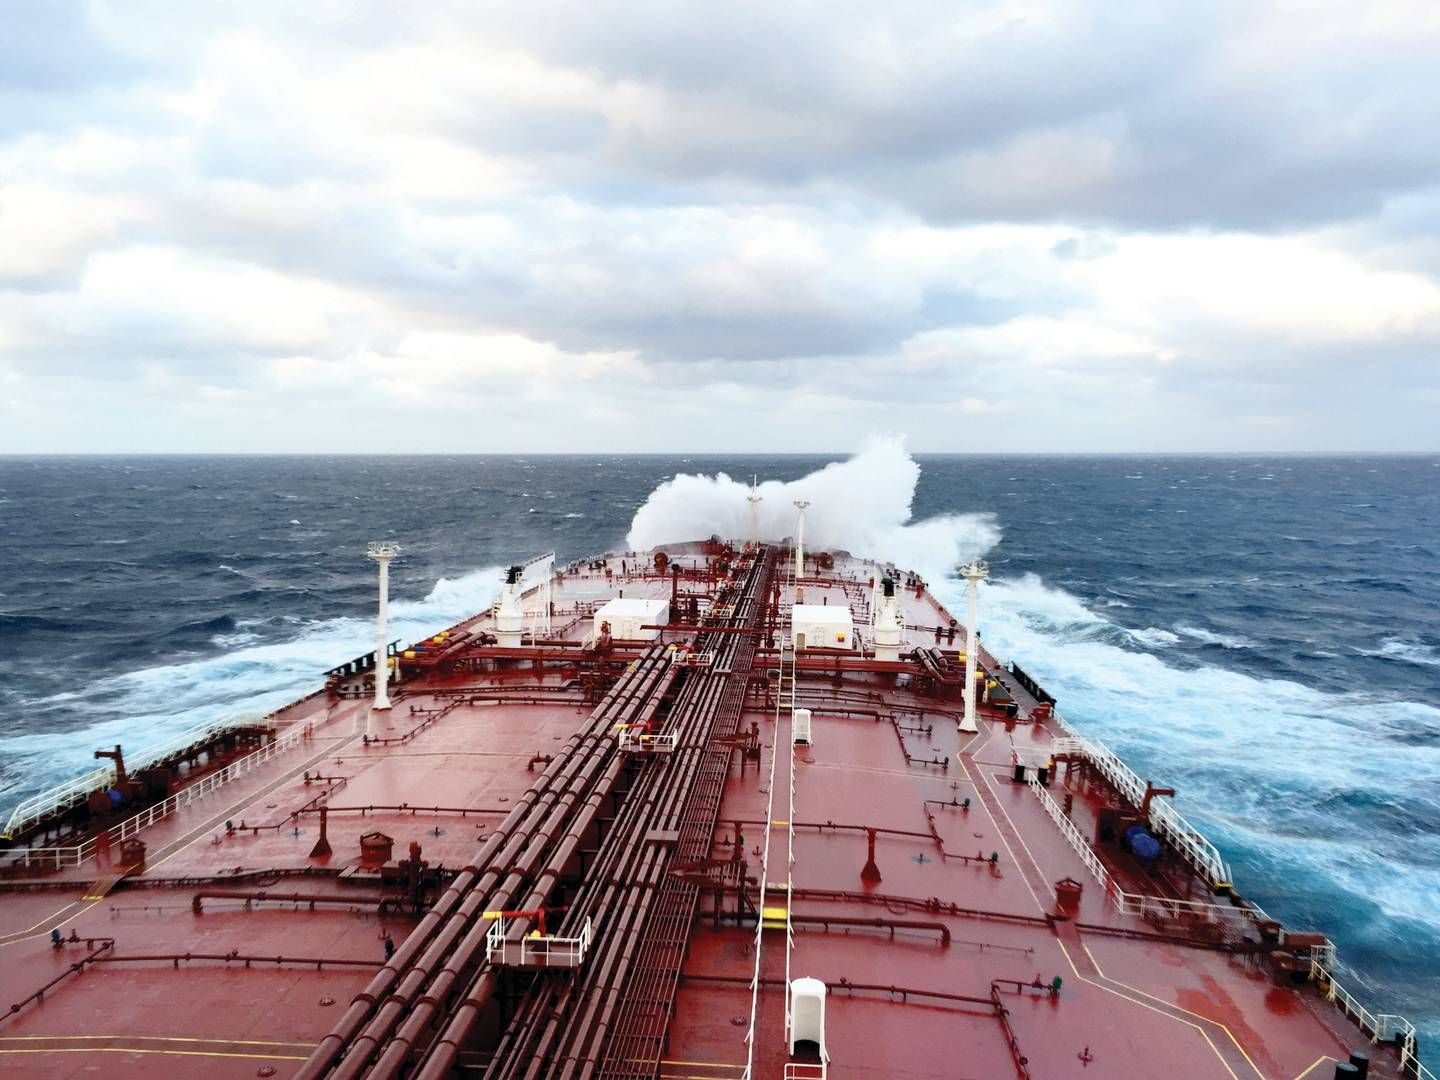 Euronav expects rising demand for crude oil to pull rates north over the winter. | Photo: Pr / Euronav